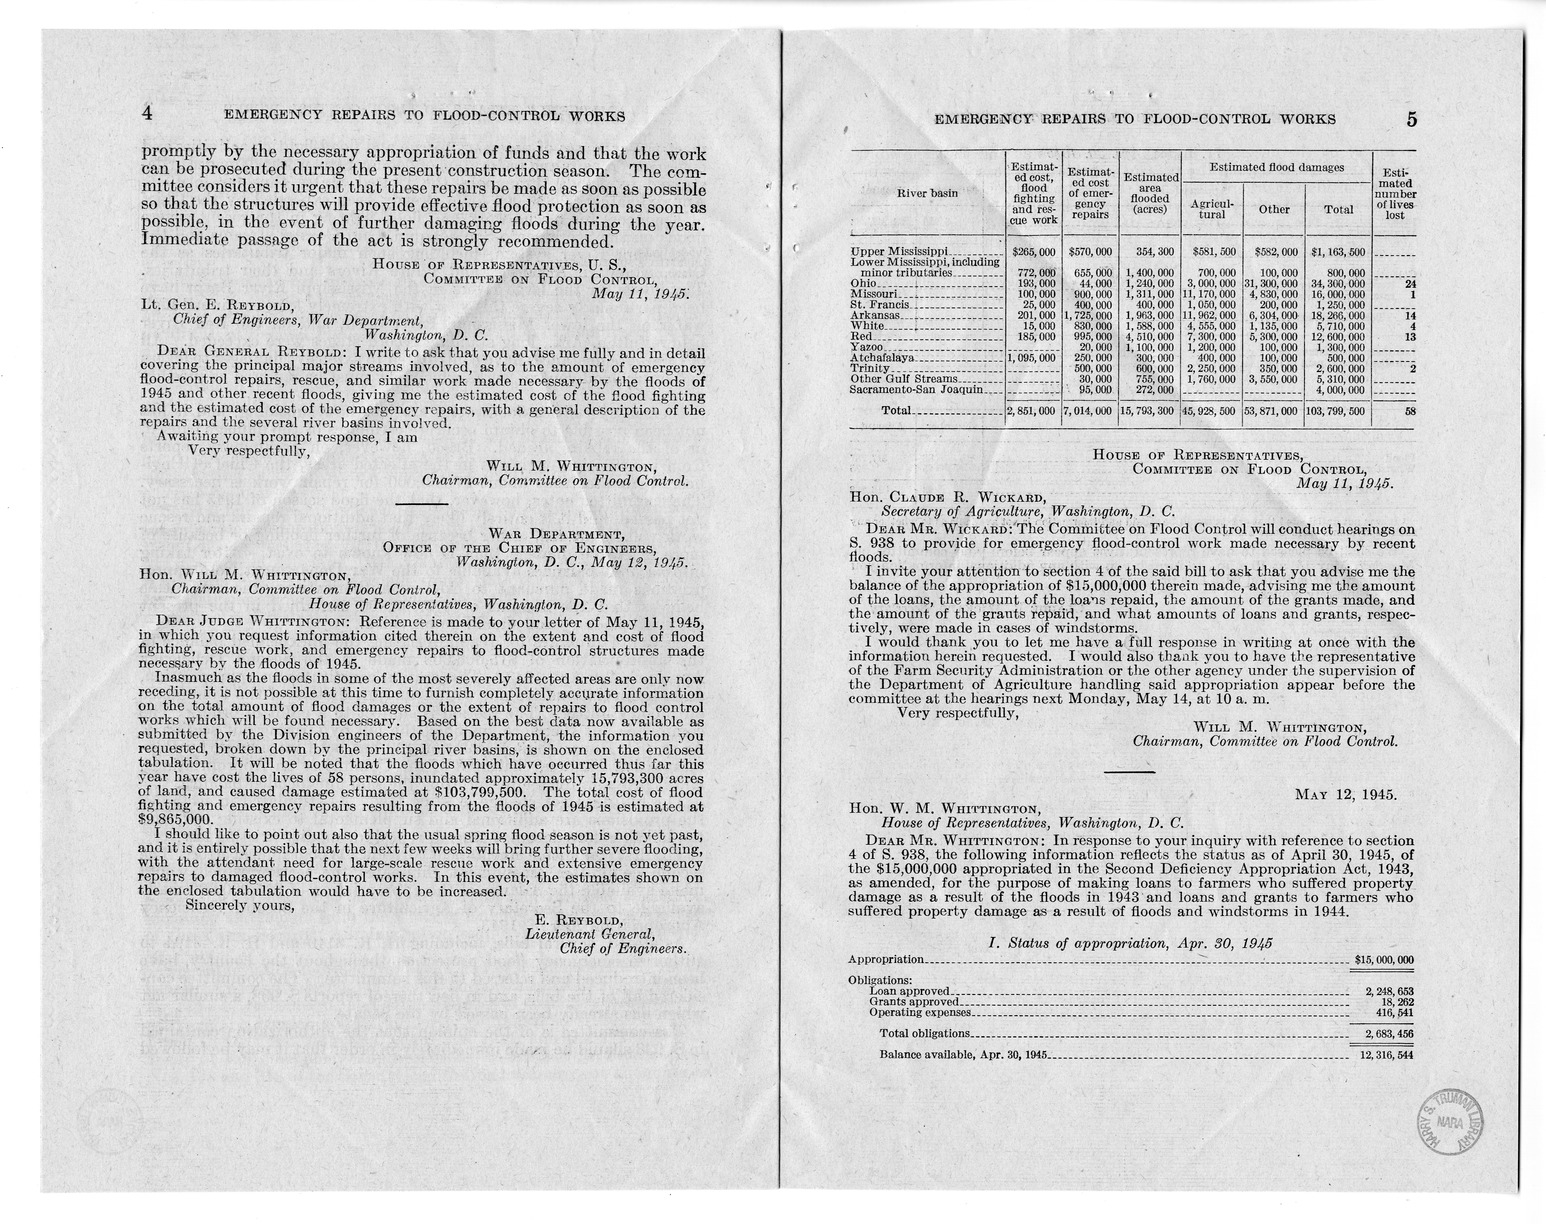 Memorandum from Harold D. Smith to M. C. Latta, S. 938, To Provide for Emergency Flood Control Work Made Necessary by Recent Floods, with Attachments